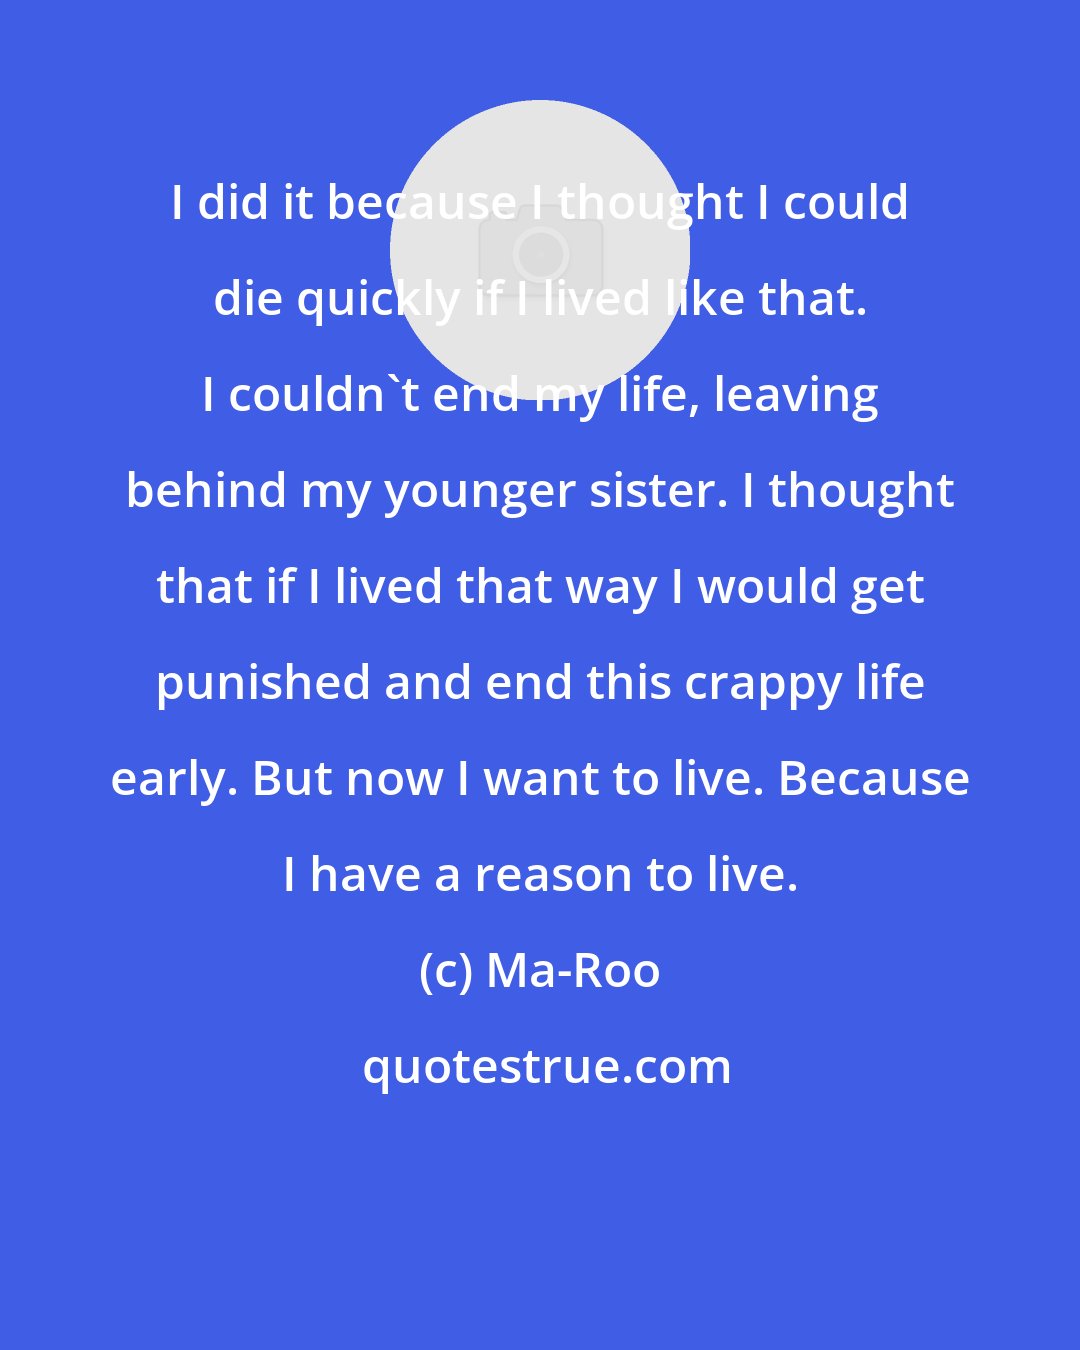 Ma-Roo: I did it because I thought I could die quickly if I lived like that. I couldn't end my life, leaving behind my younger sister. I thought that if I lived that way I would get punished and end this crappy life early. But now I want to live. Because I have a reason to live.